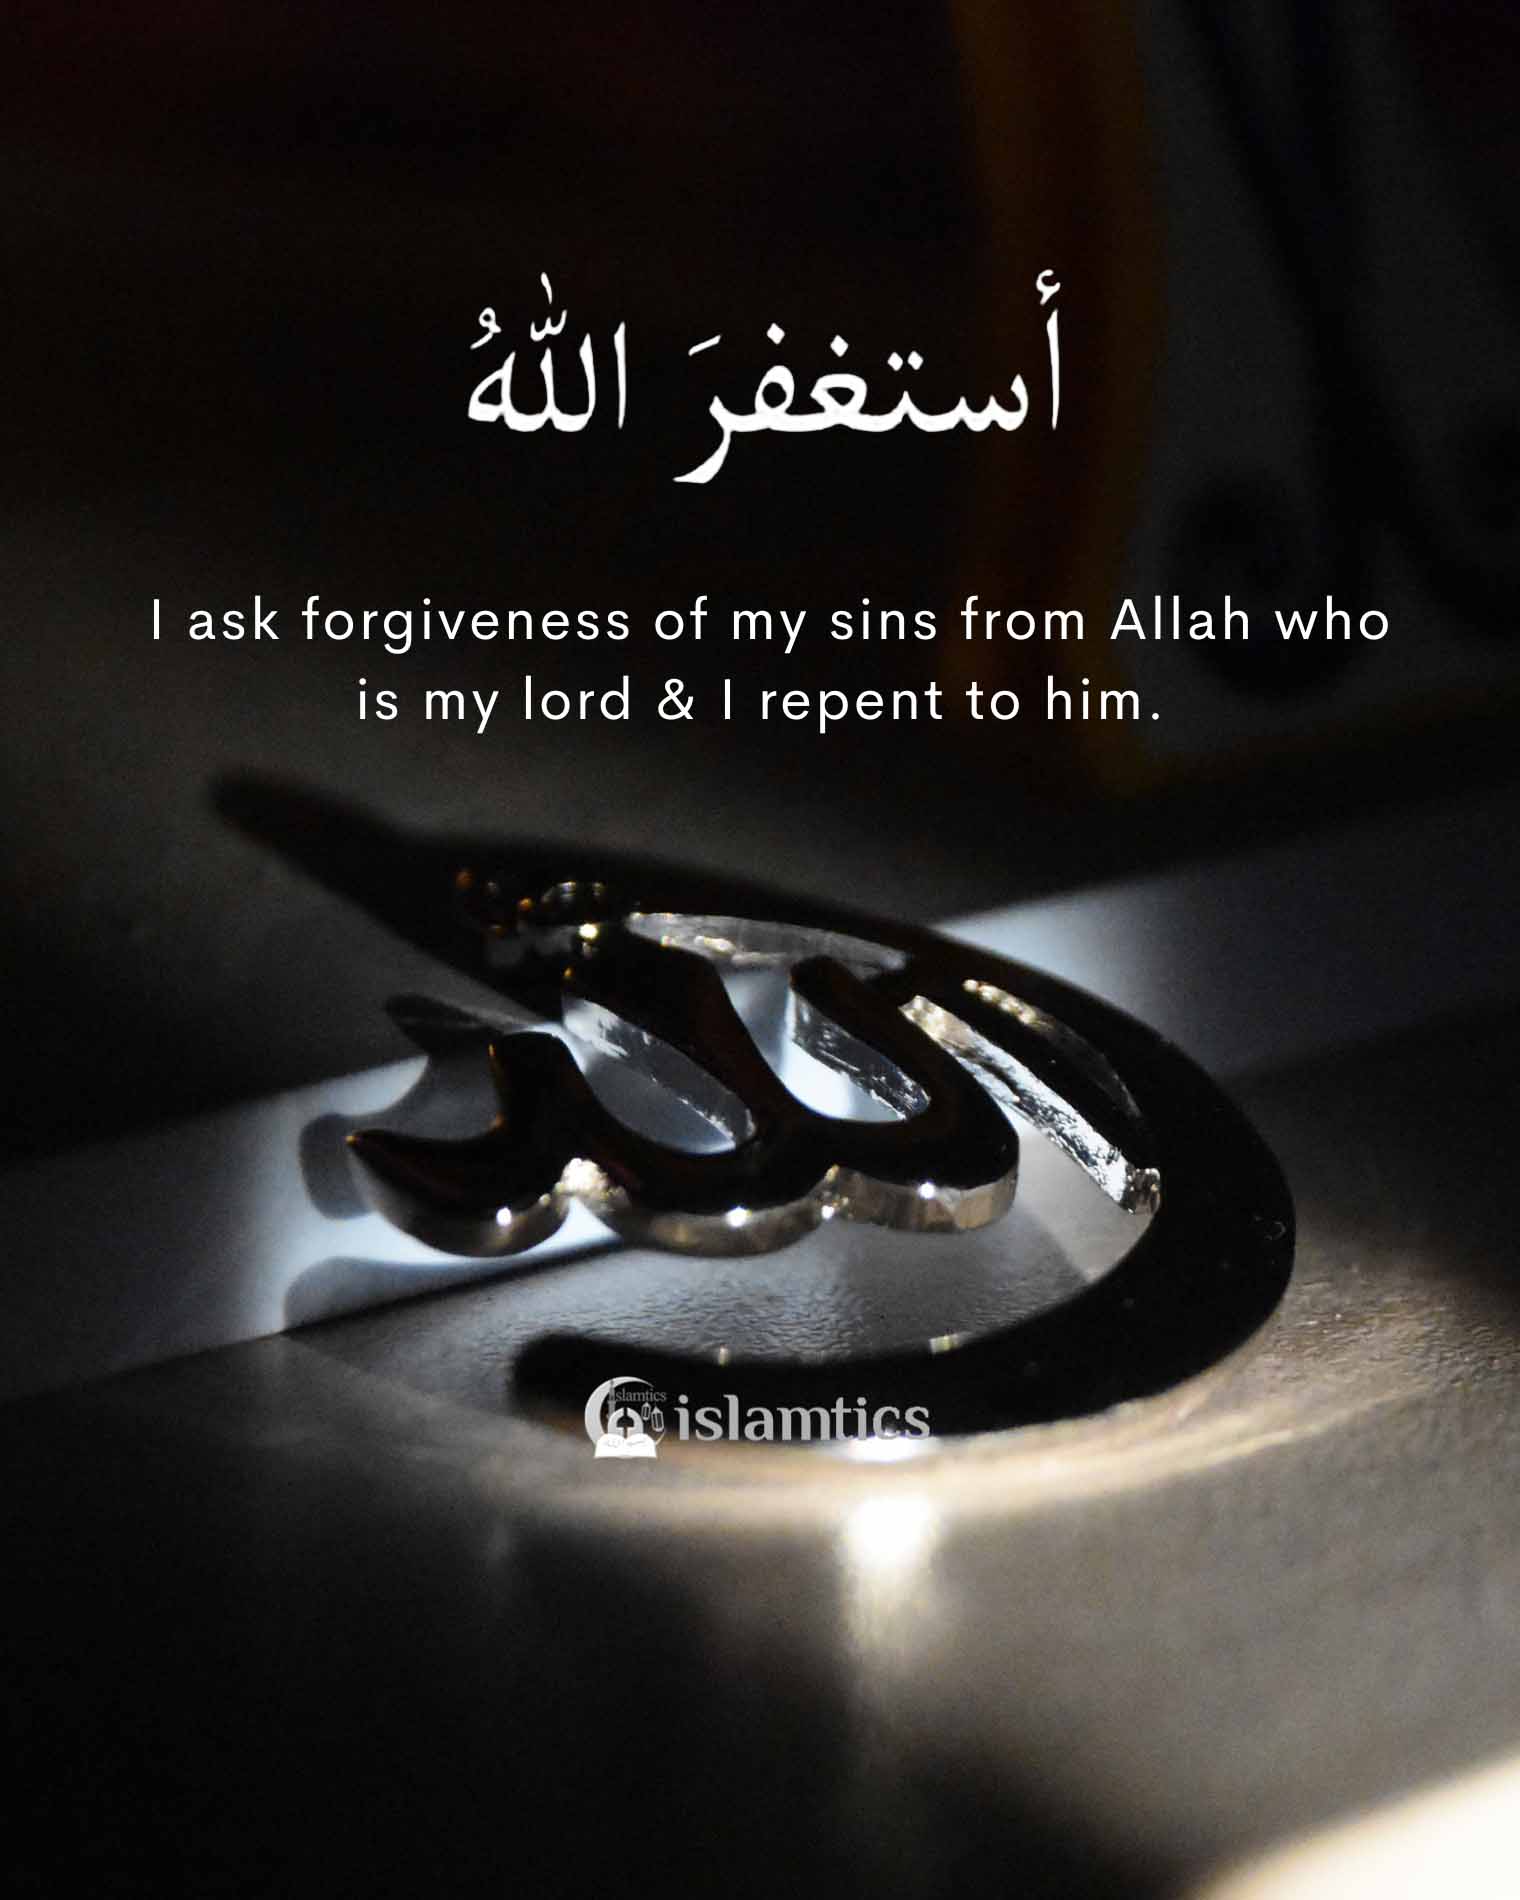 I ask forgiveness of my sins from Allah